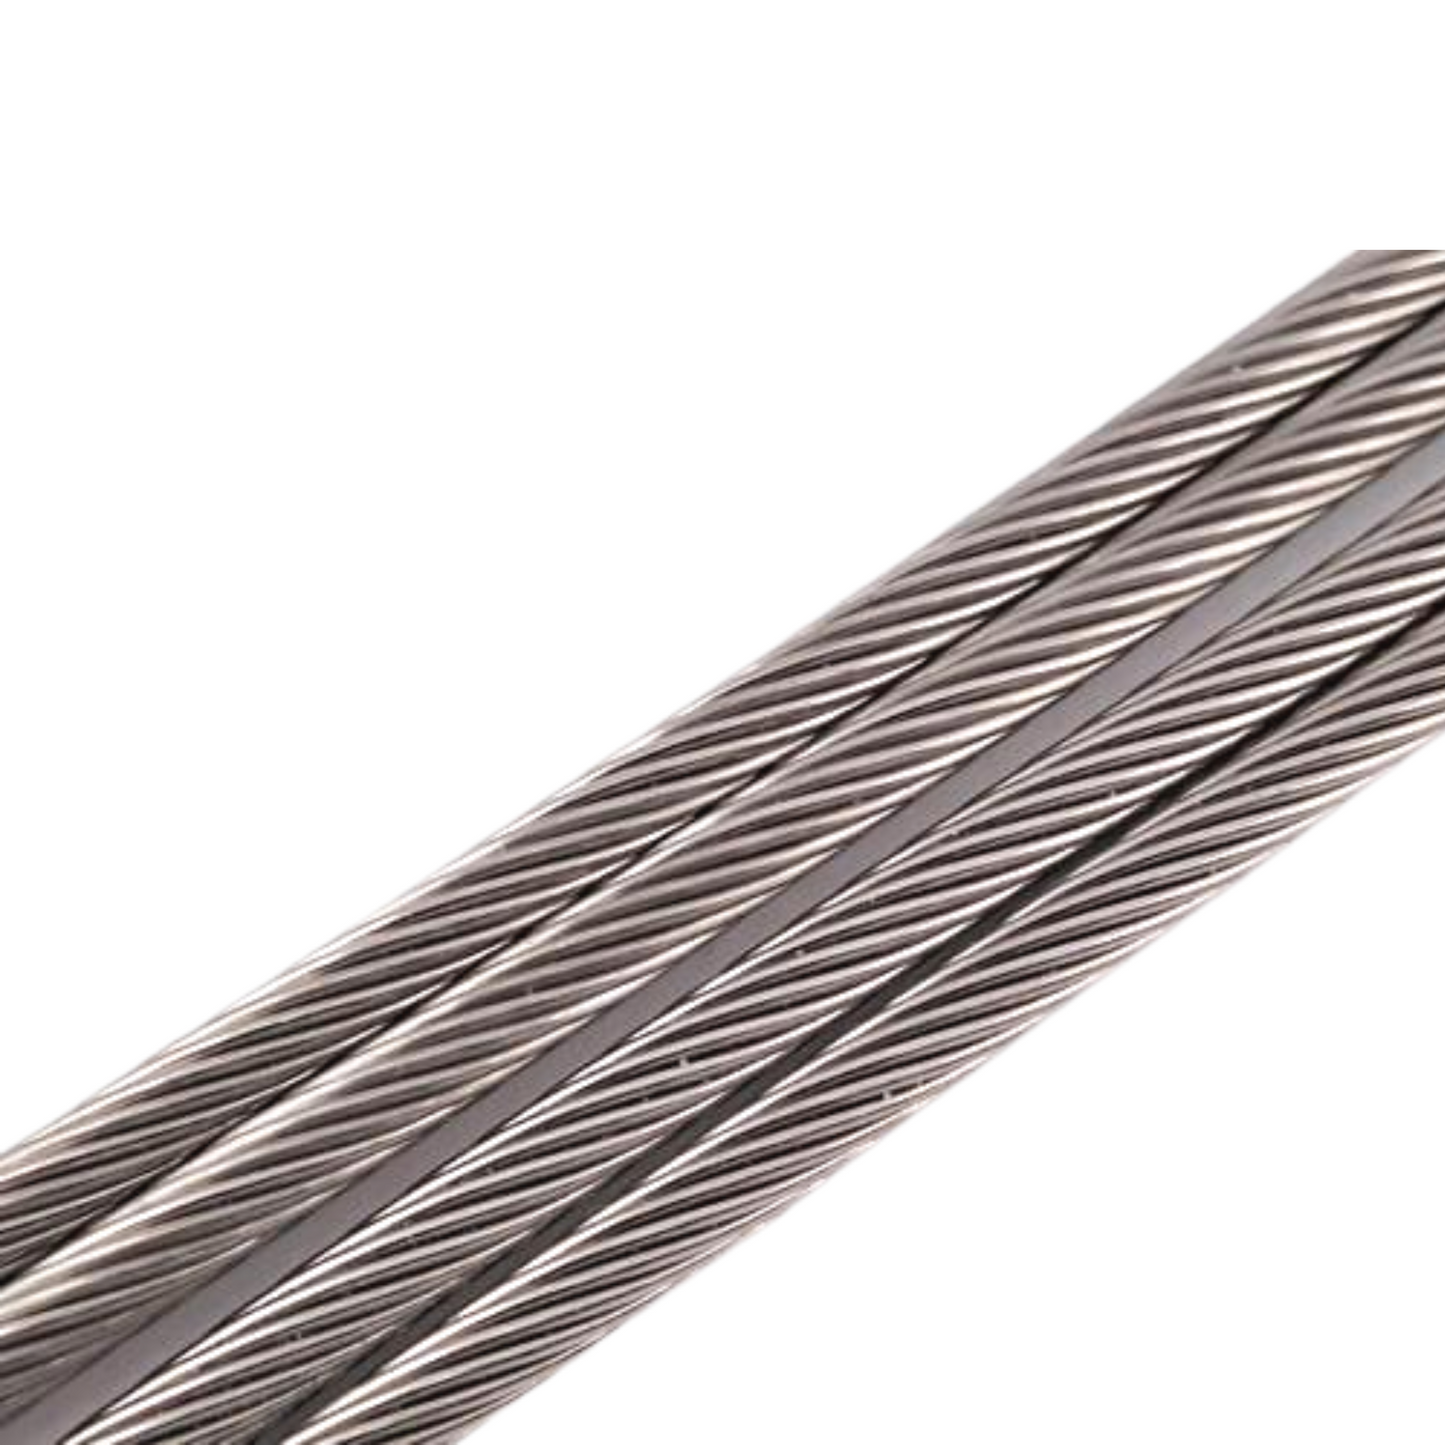 3mm 1x19 Stainless Steel Cable